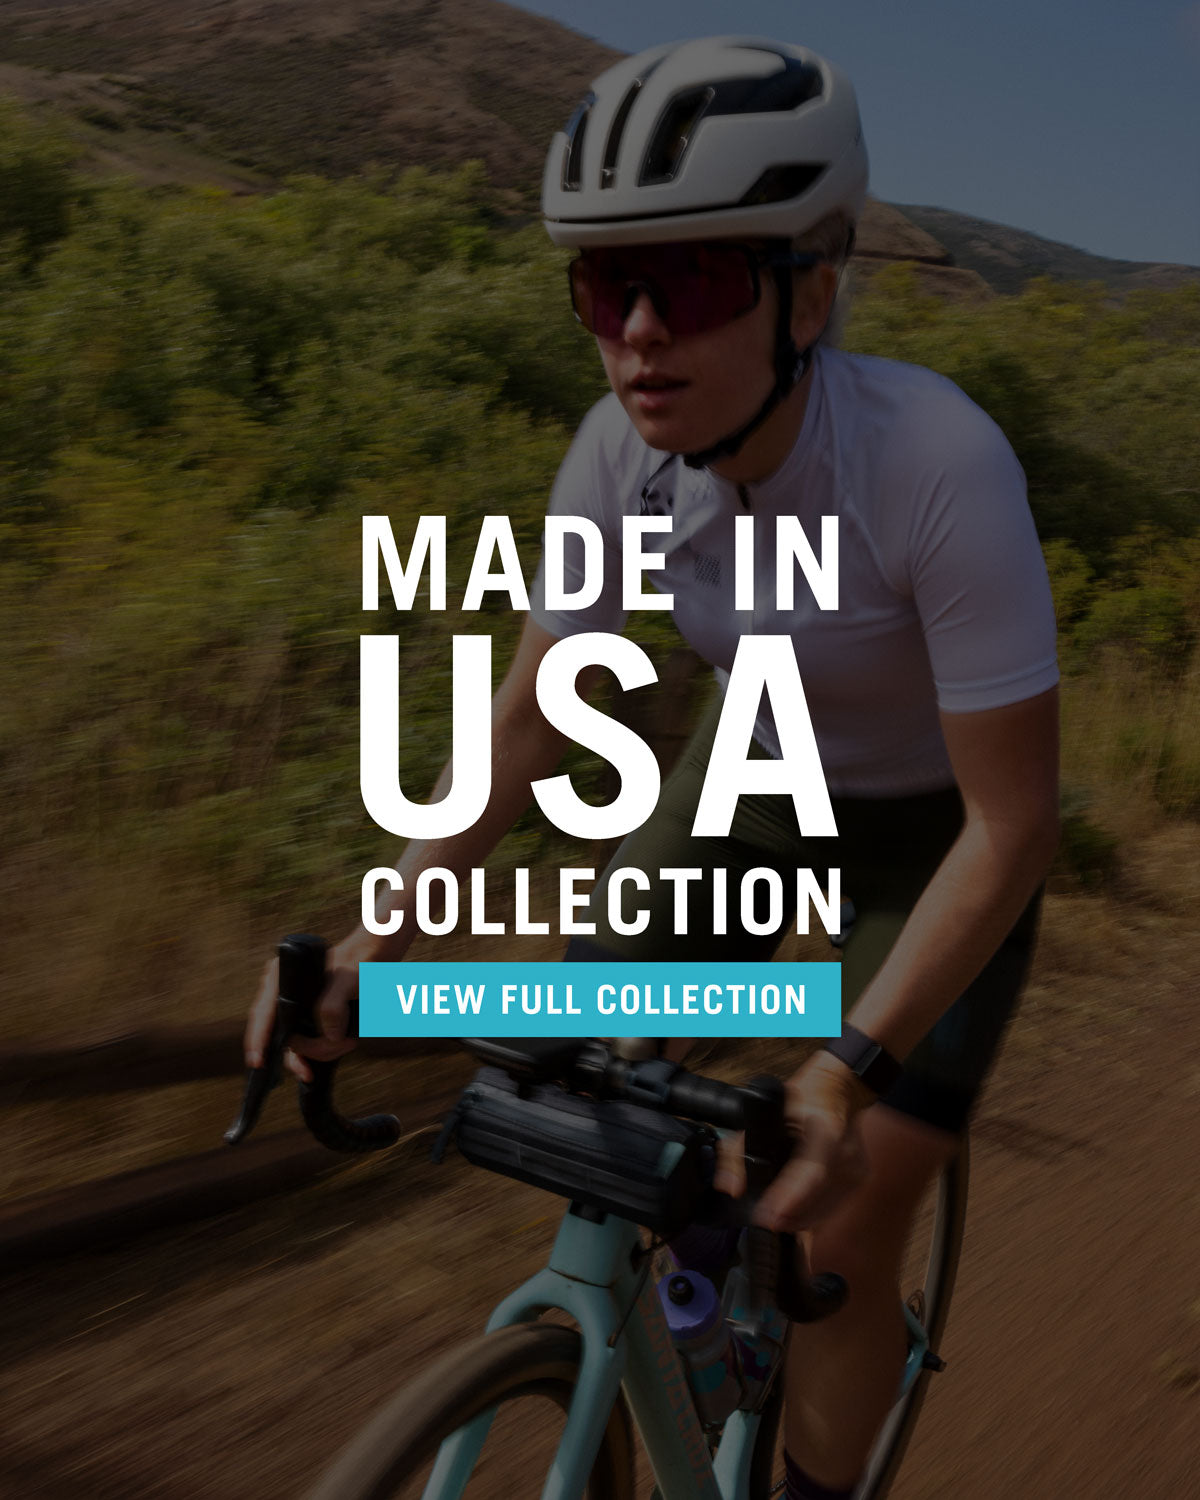 kloof hypothese hun Ornot Bike - Climate Neutral Certified - Made in USA. – Ornot Online Store